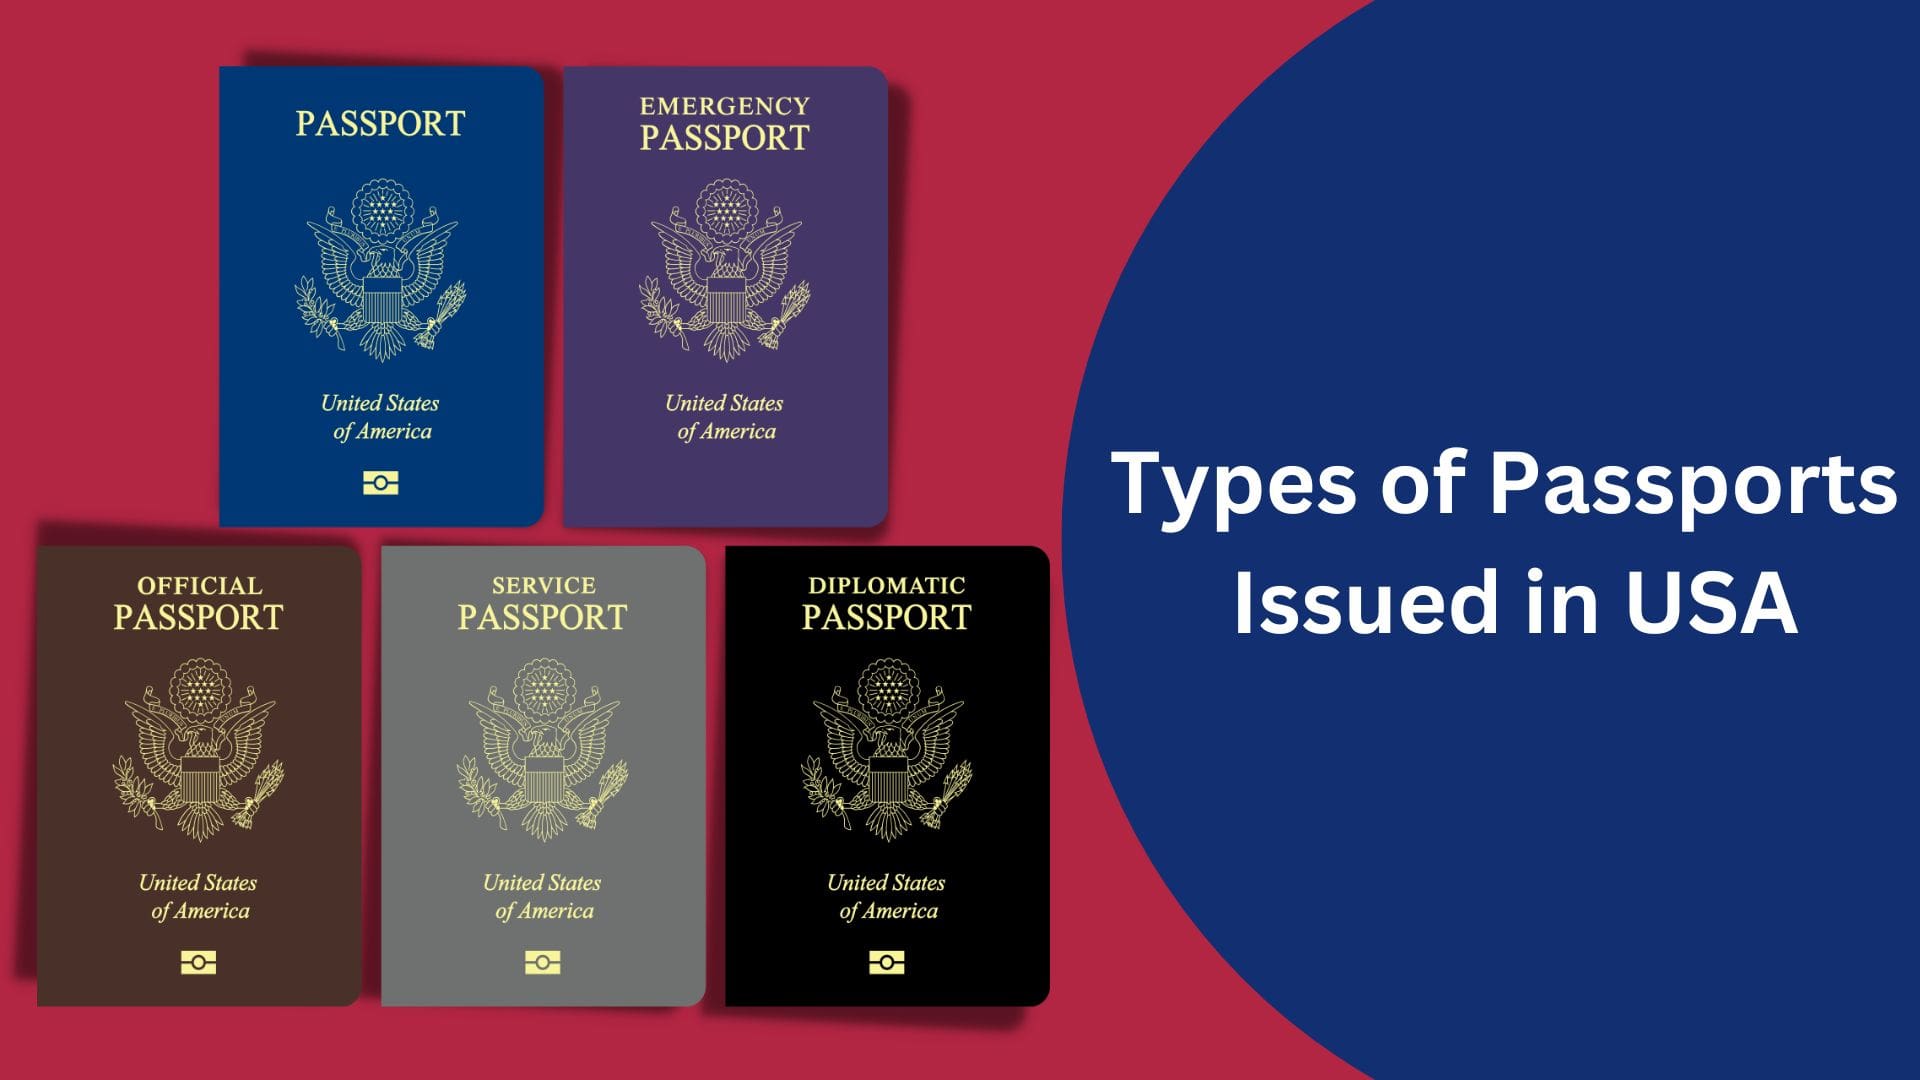 who issues passports